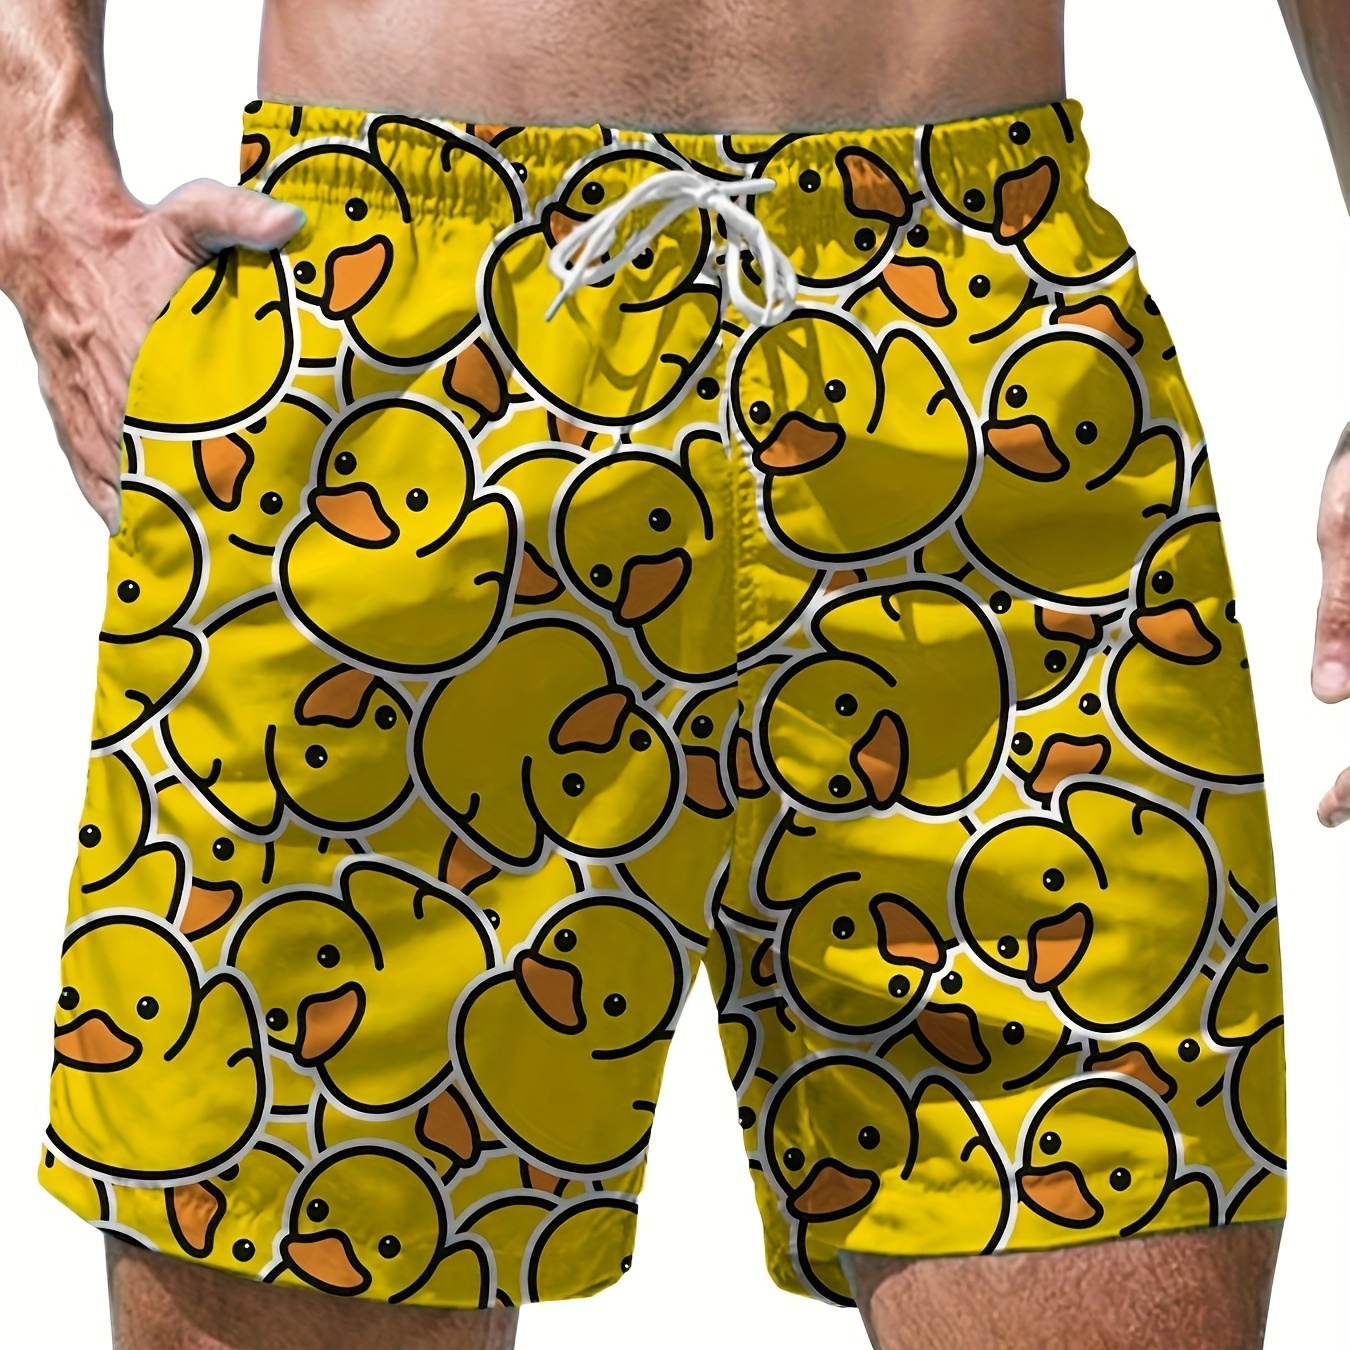 

Men's Cartoon Style Yellow Rubber Duck Pattern Print Shorts With Drawstring And Dual Front Pockets, Casual And Stylish Shorts Suitable For Summer Leisurewear